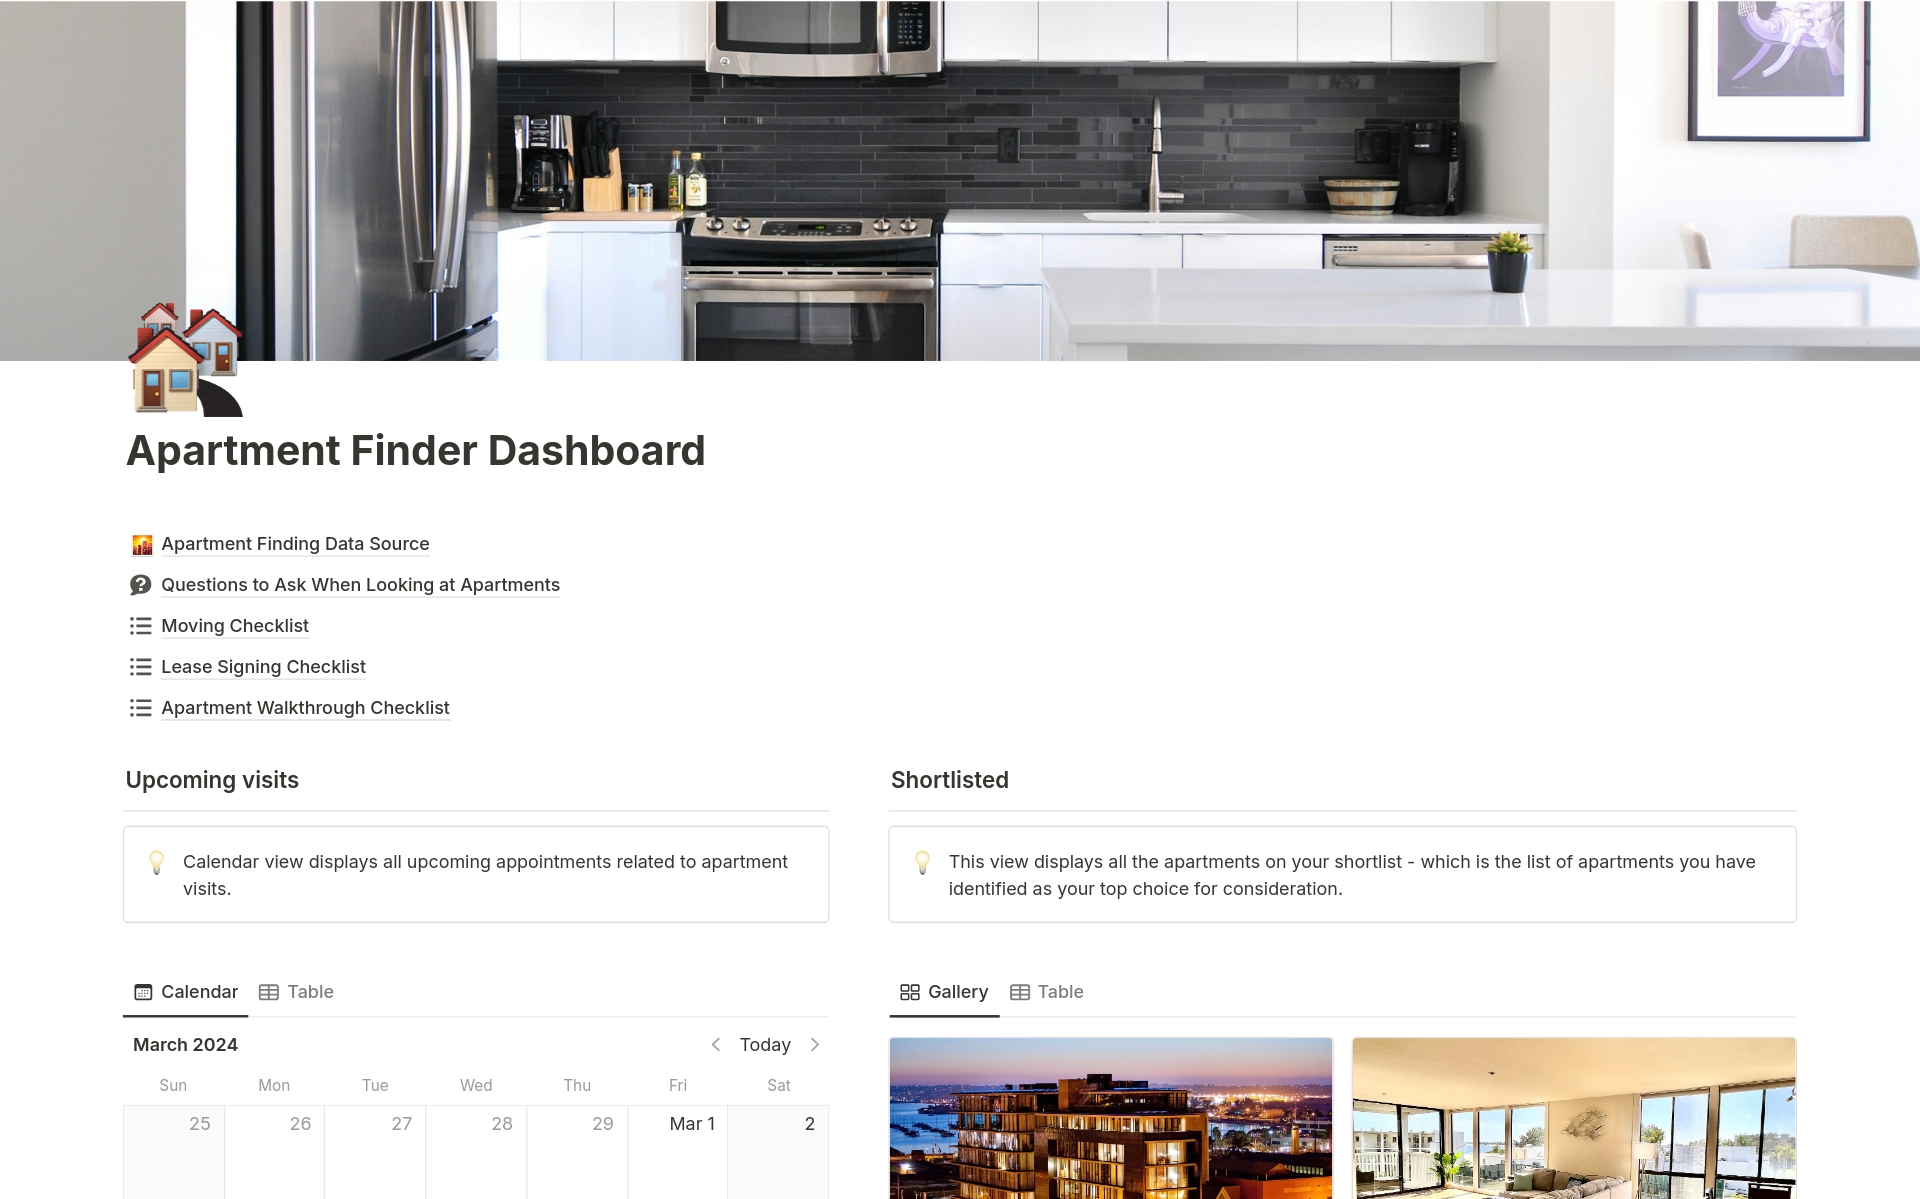 Find your dream apartment stress-free with this all-in-one apartment finder dashboard. Track listings and stay organized with comprehensive checklists for moving, signing the lease, and apartment walkthroughs.
